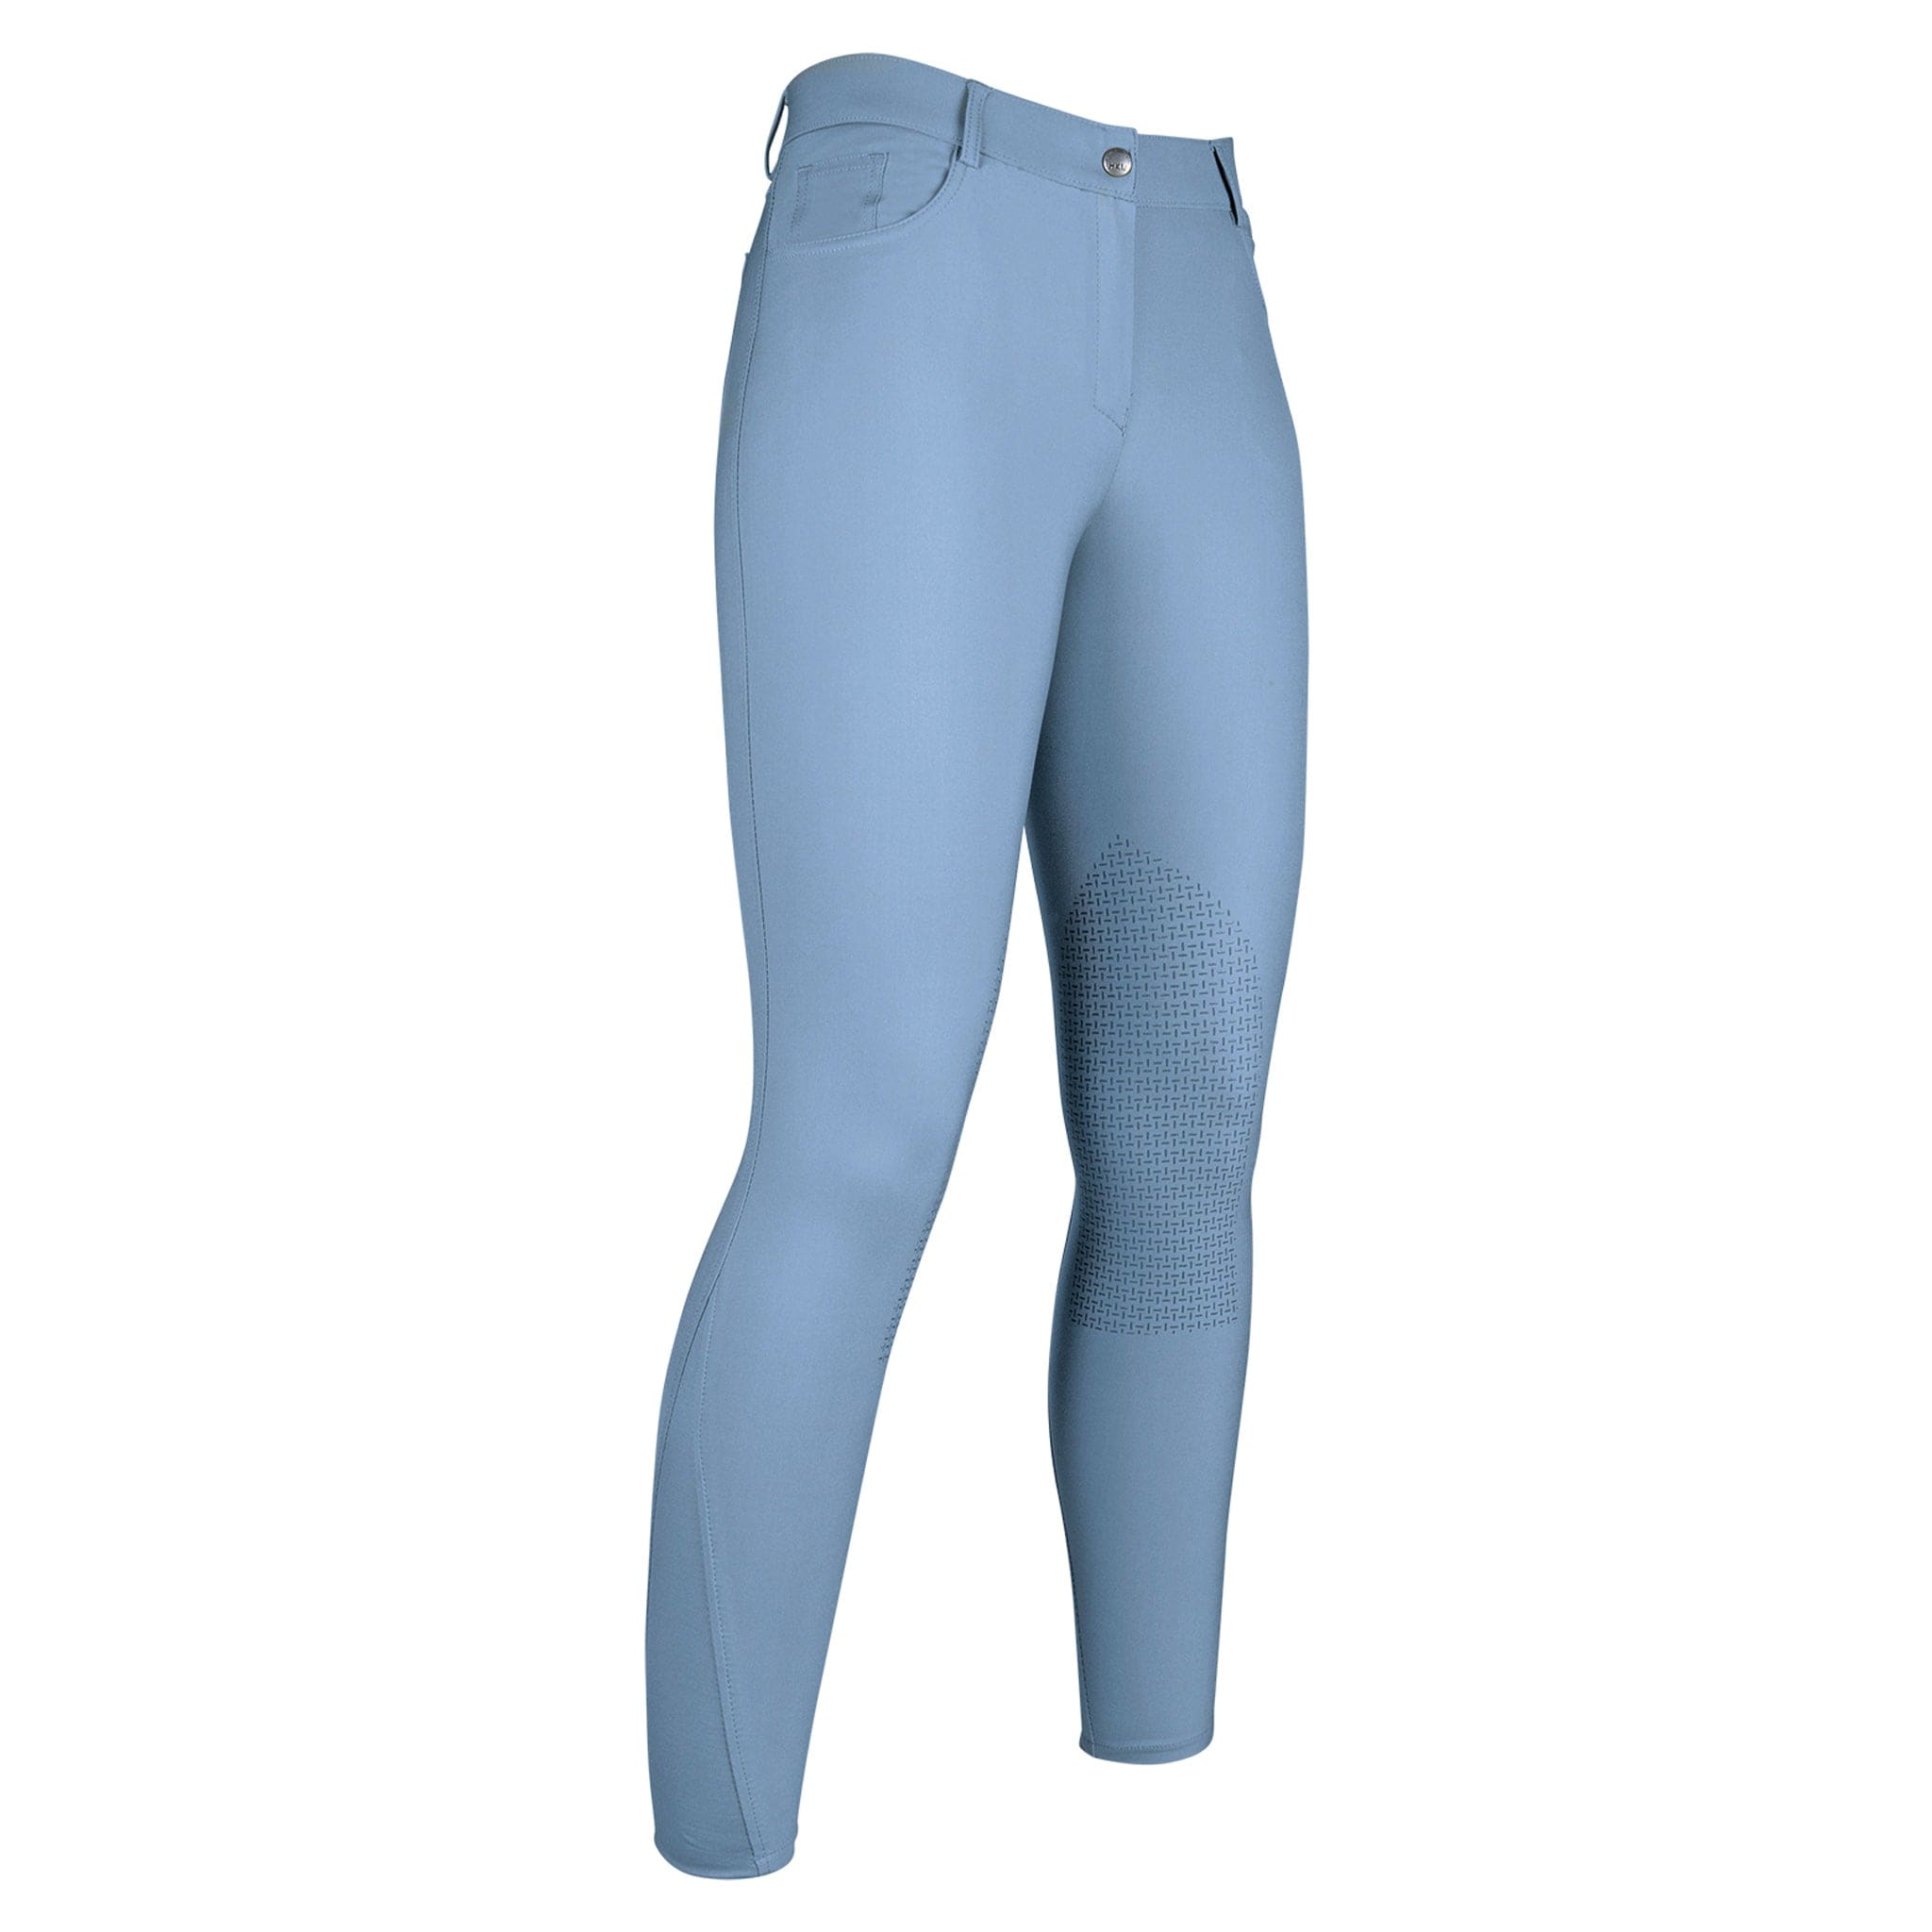 HKM Sunshine Silicone Knee Patch Breeches 12709 Jeans Light Blue Front Right View